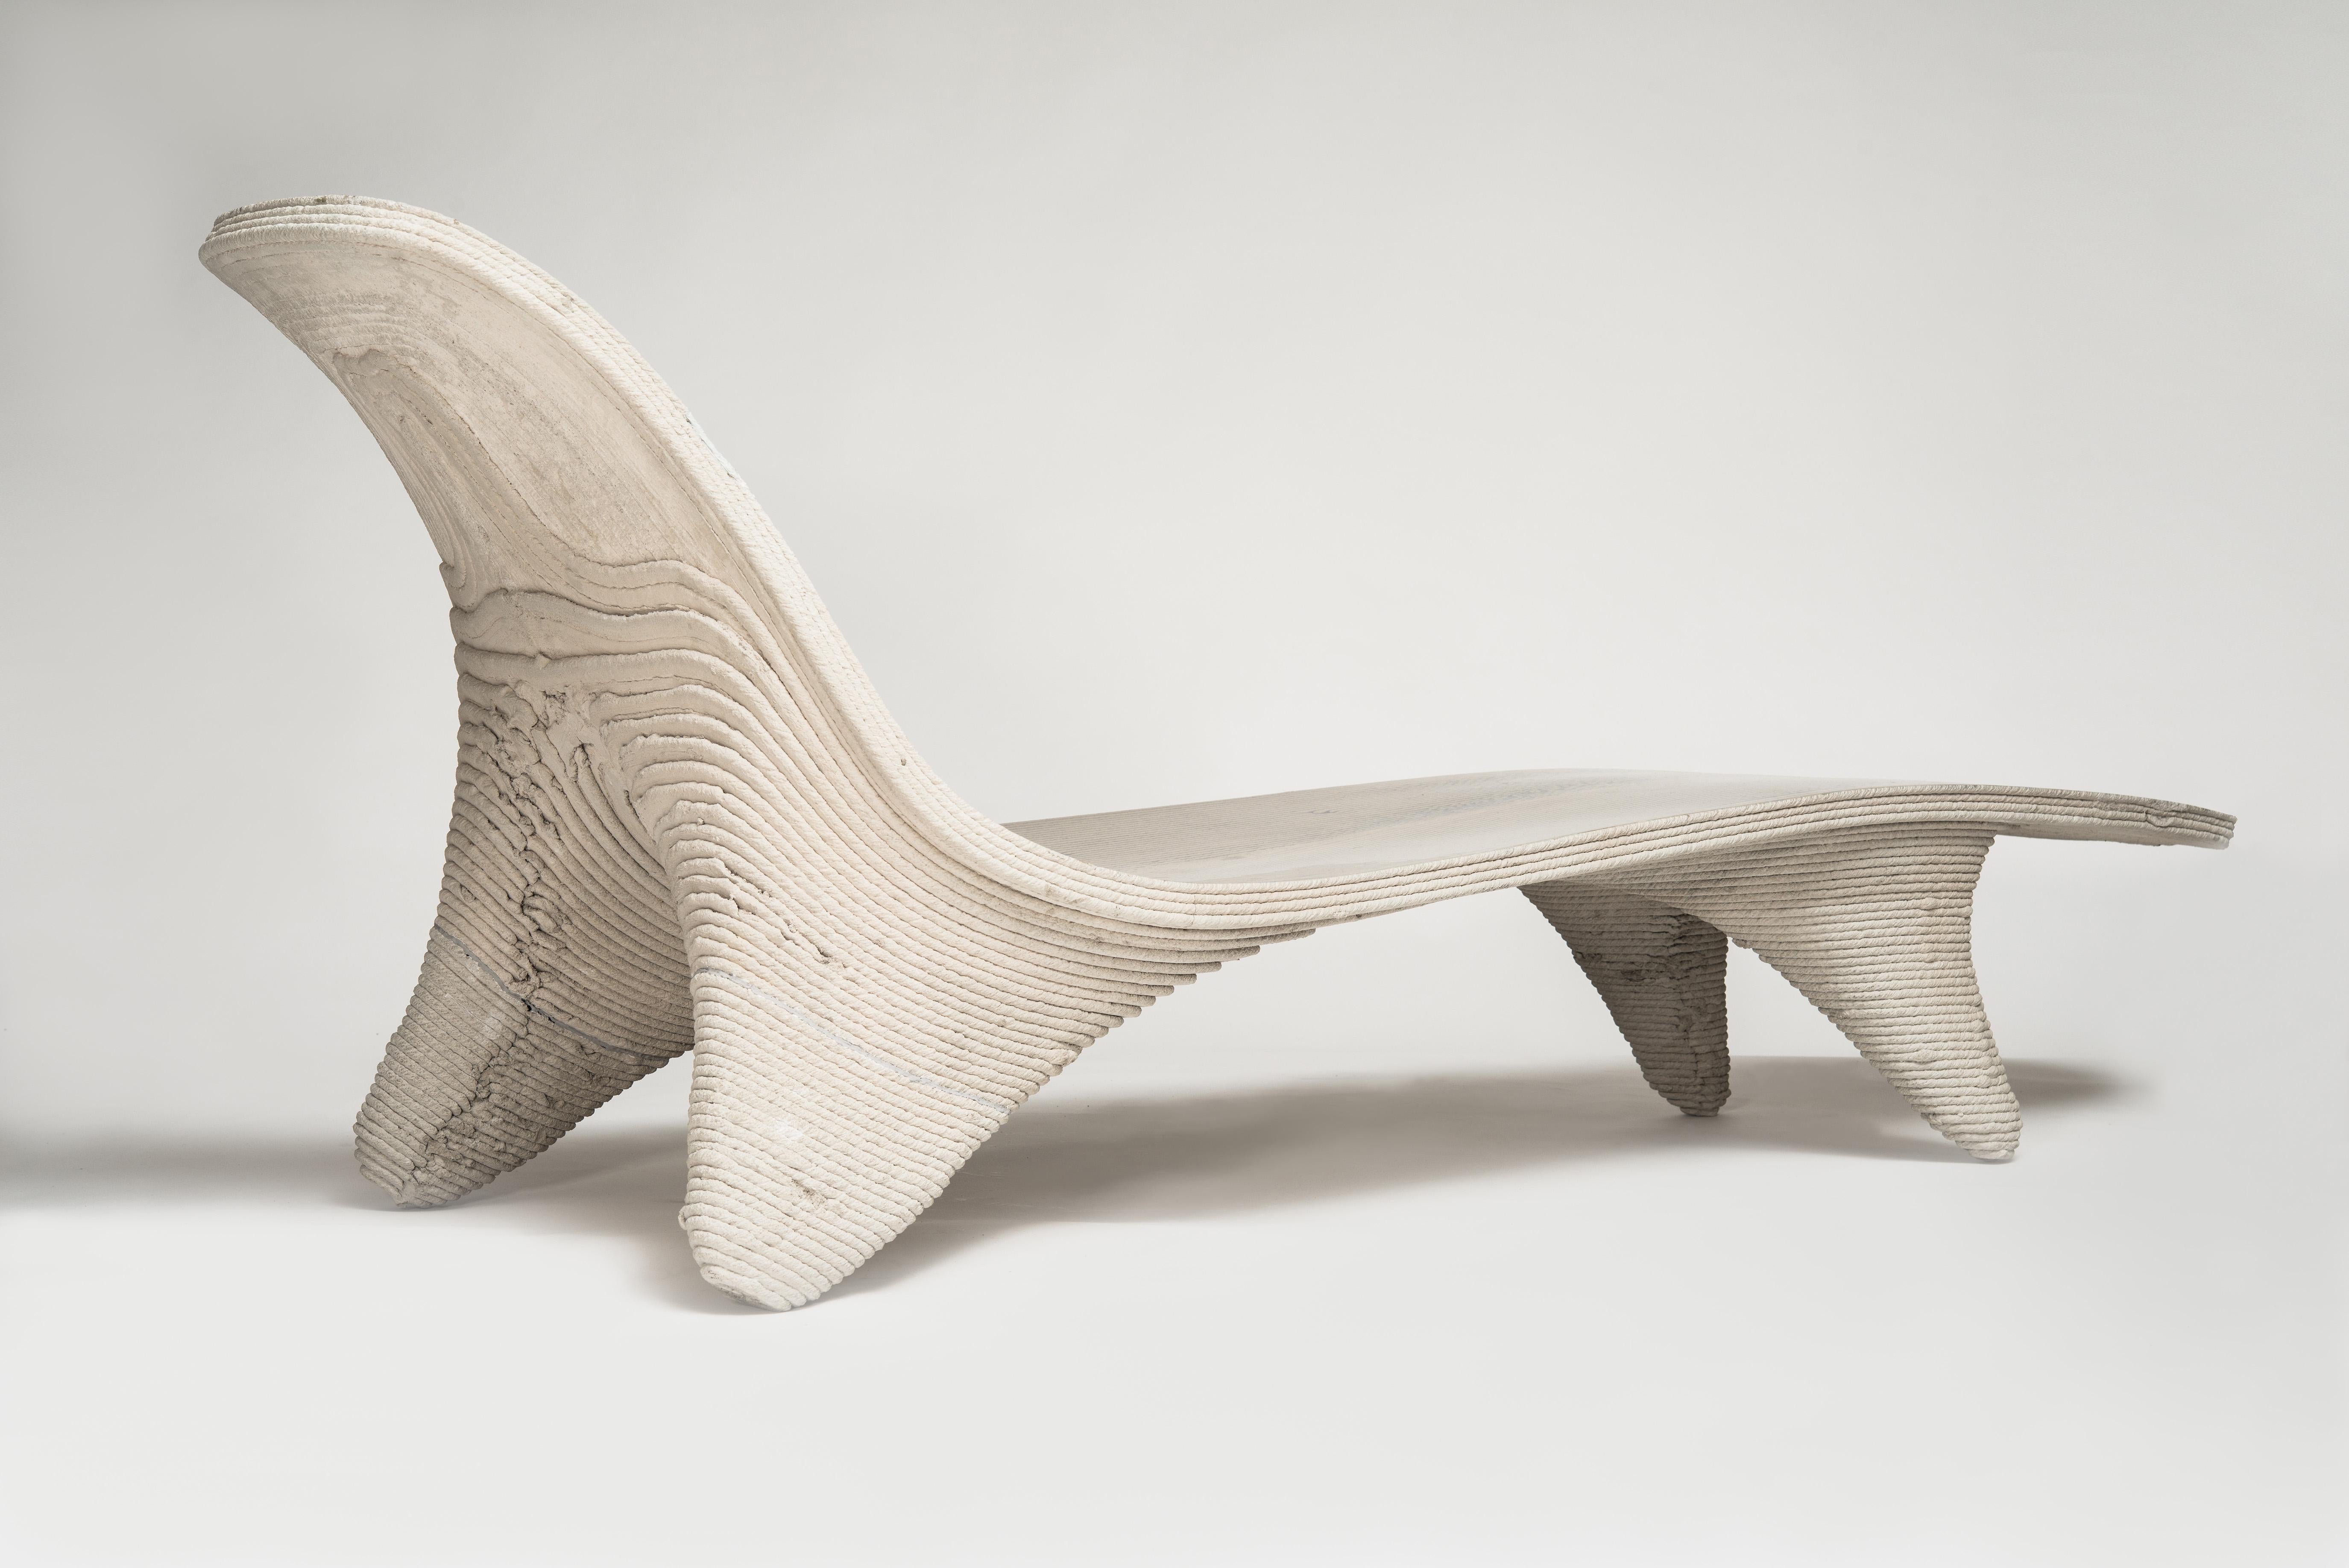 Digital Chaiselongue by Philipp Aduatz
2018
Edition of 8 + 4 A/P
Dimensions: 90 × 50 × 50cm
Materials: Concrete 3D printed, Carbon fibre reinforced

The Digital Chaiselongue emerged from a collaboration of Viennese product designer Philipp